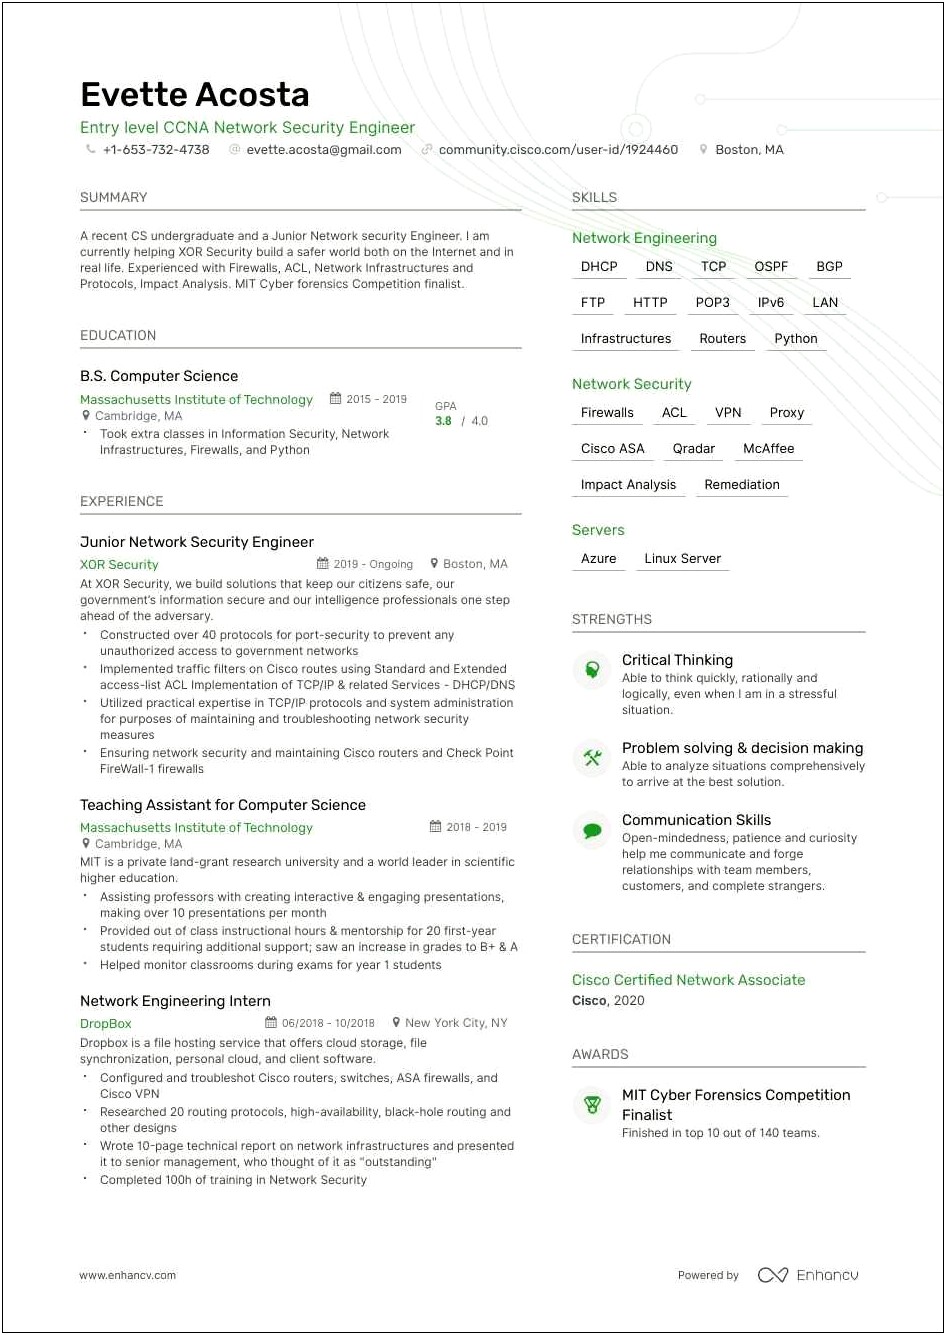 About Me Section Resume Examples Cs